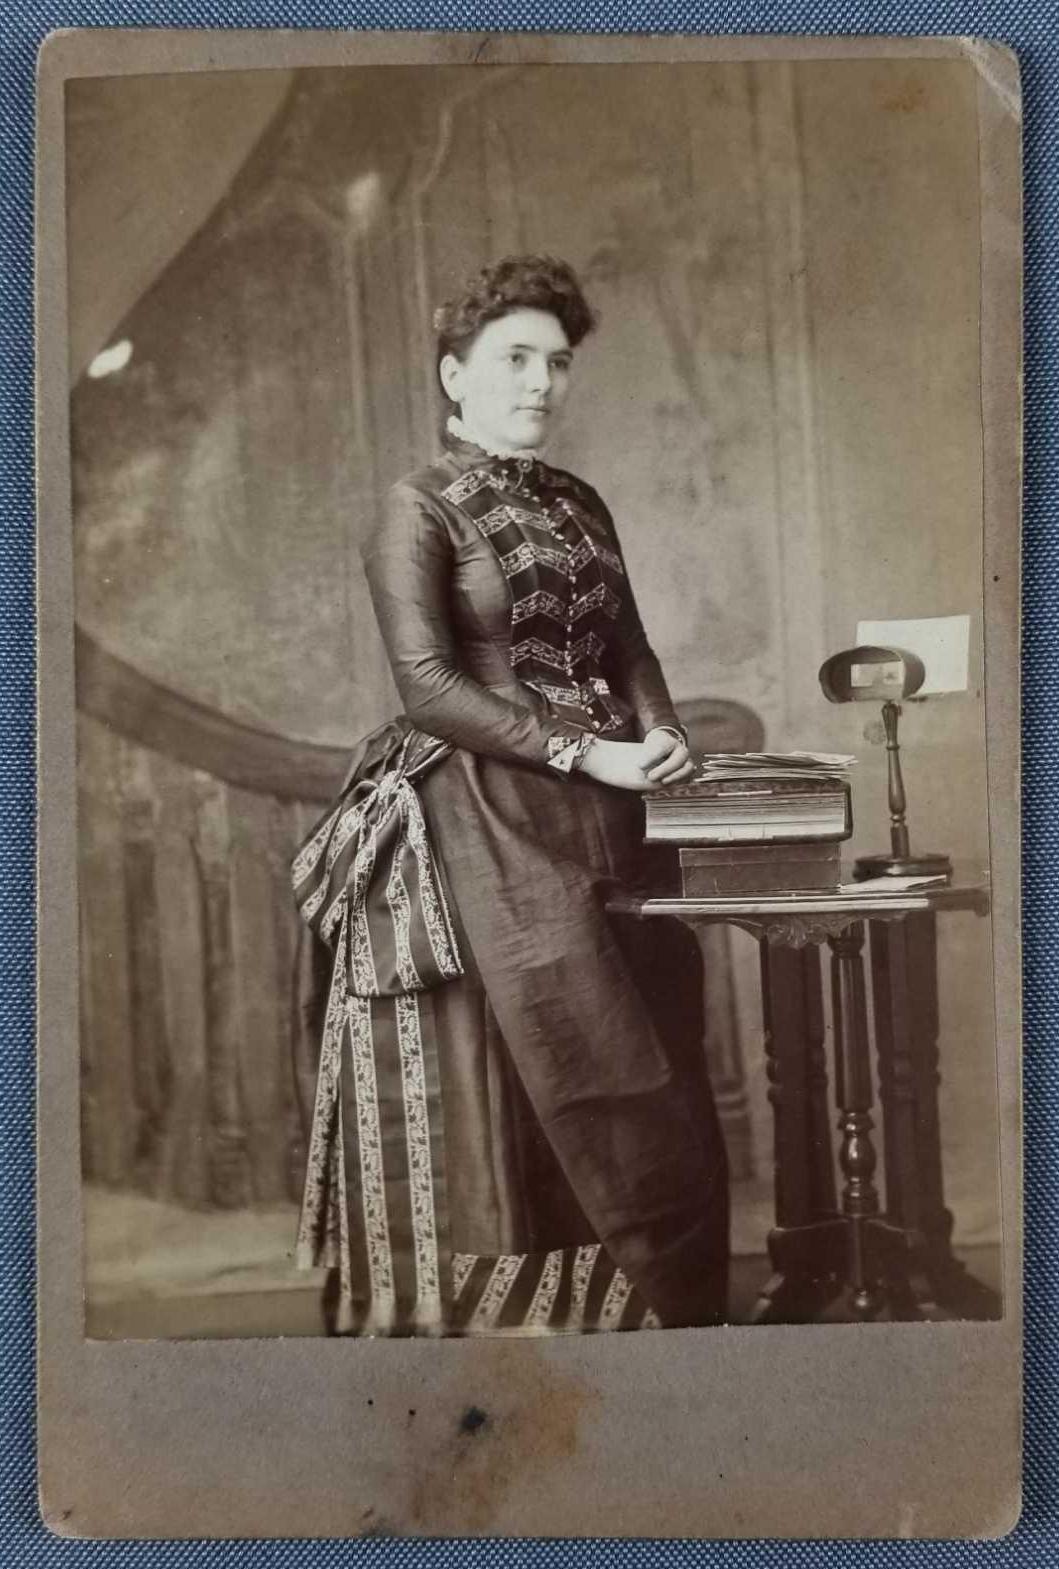 Antique photograph of woman with stereoscope